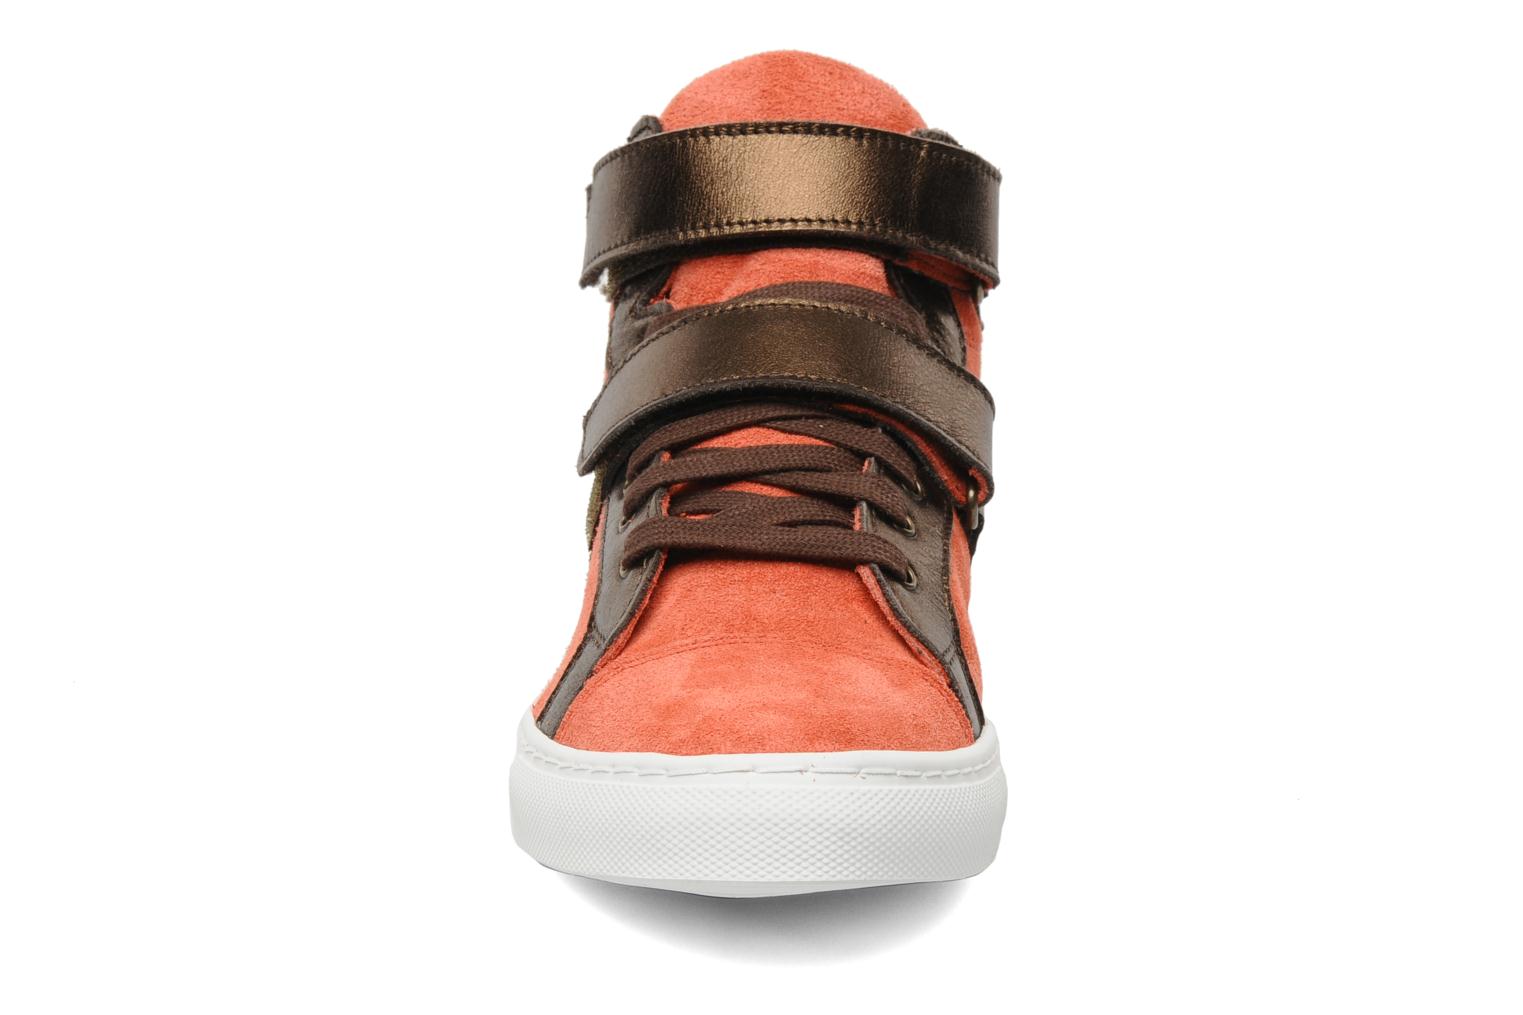 Bensimon Sneakys Suède/Cuir F (Red) - Trainers chez Sarenza (131954)